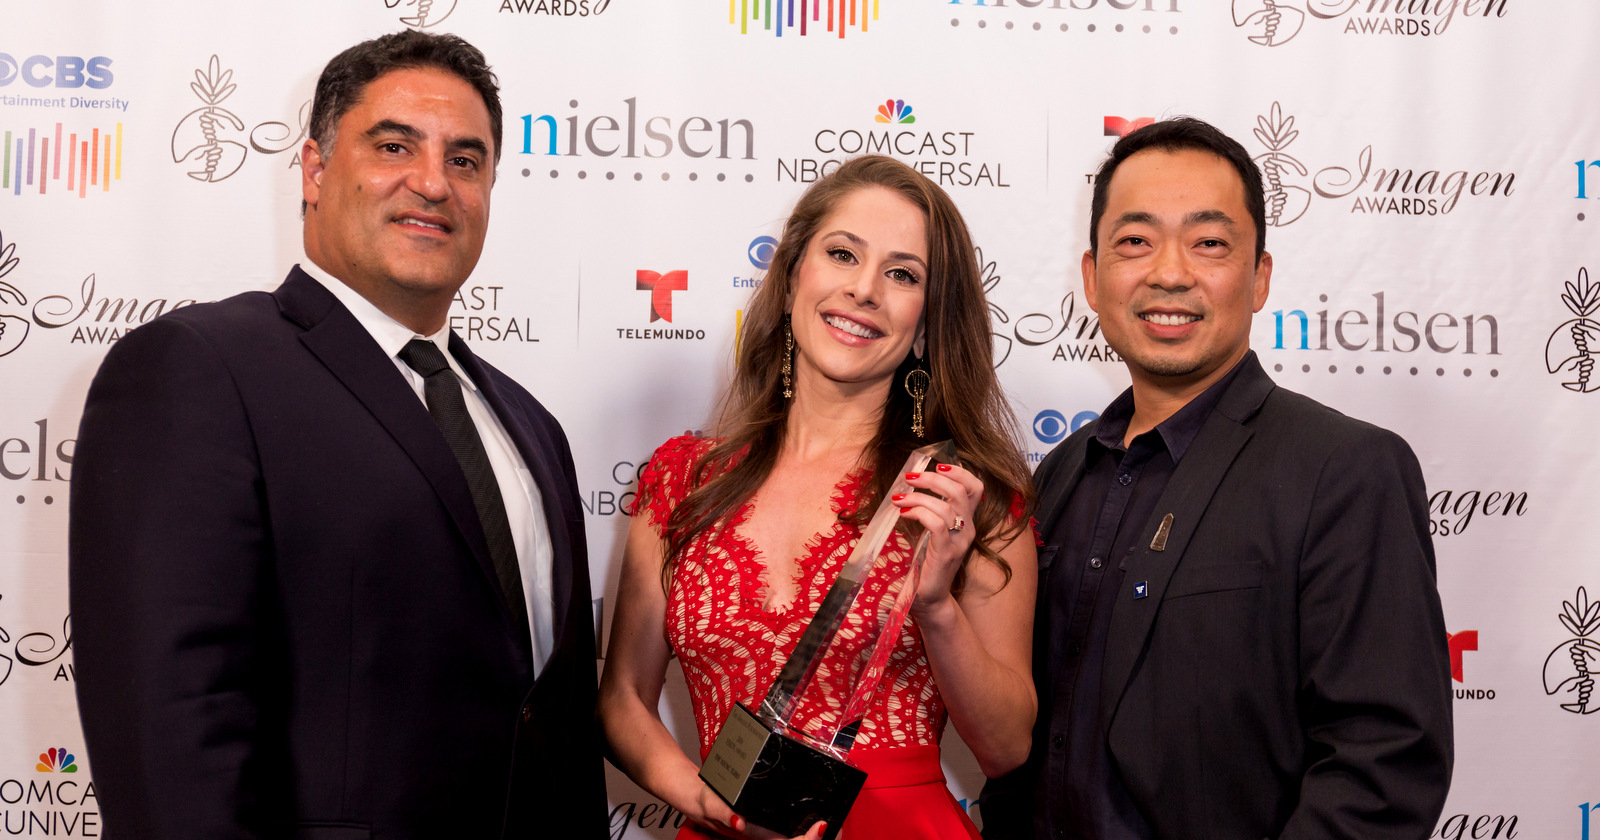 Cenk Uygur, left, Ana Kasparian, and Steve Oh pose with the 2016 Vision award for "The Young Turks" at the 31st Annual Imagen Awards ceremony, Sept. 9, 2016, in Beverly Hills, CA. (Willy Sanjuan/Invision/AP)